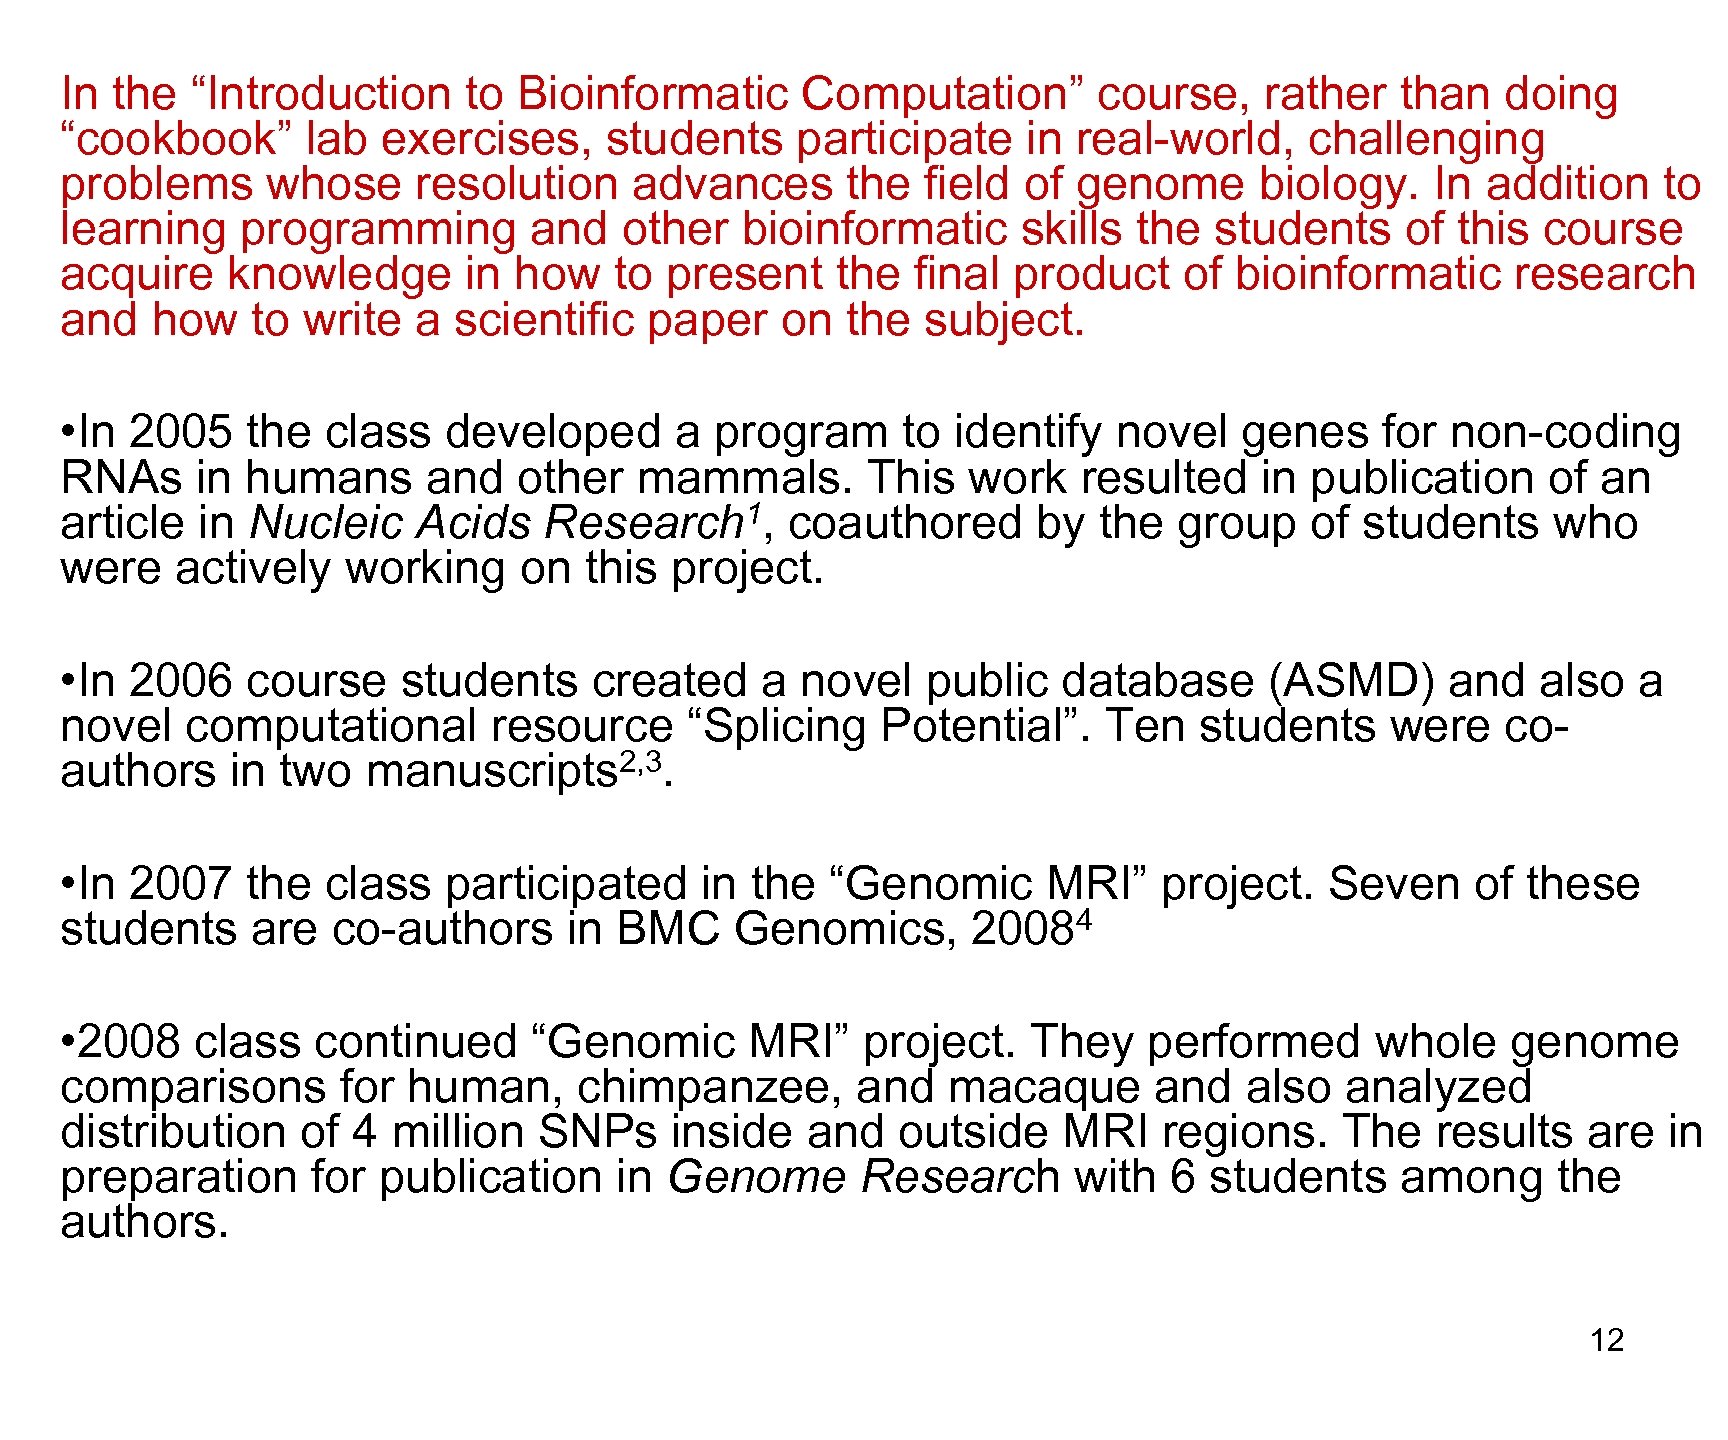 In the “Introduction to Bioinformatic Computation” course, rather than doing “cookbook” lab exercises, students